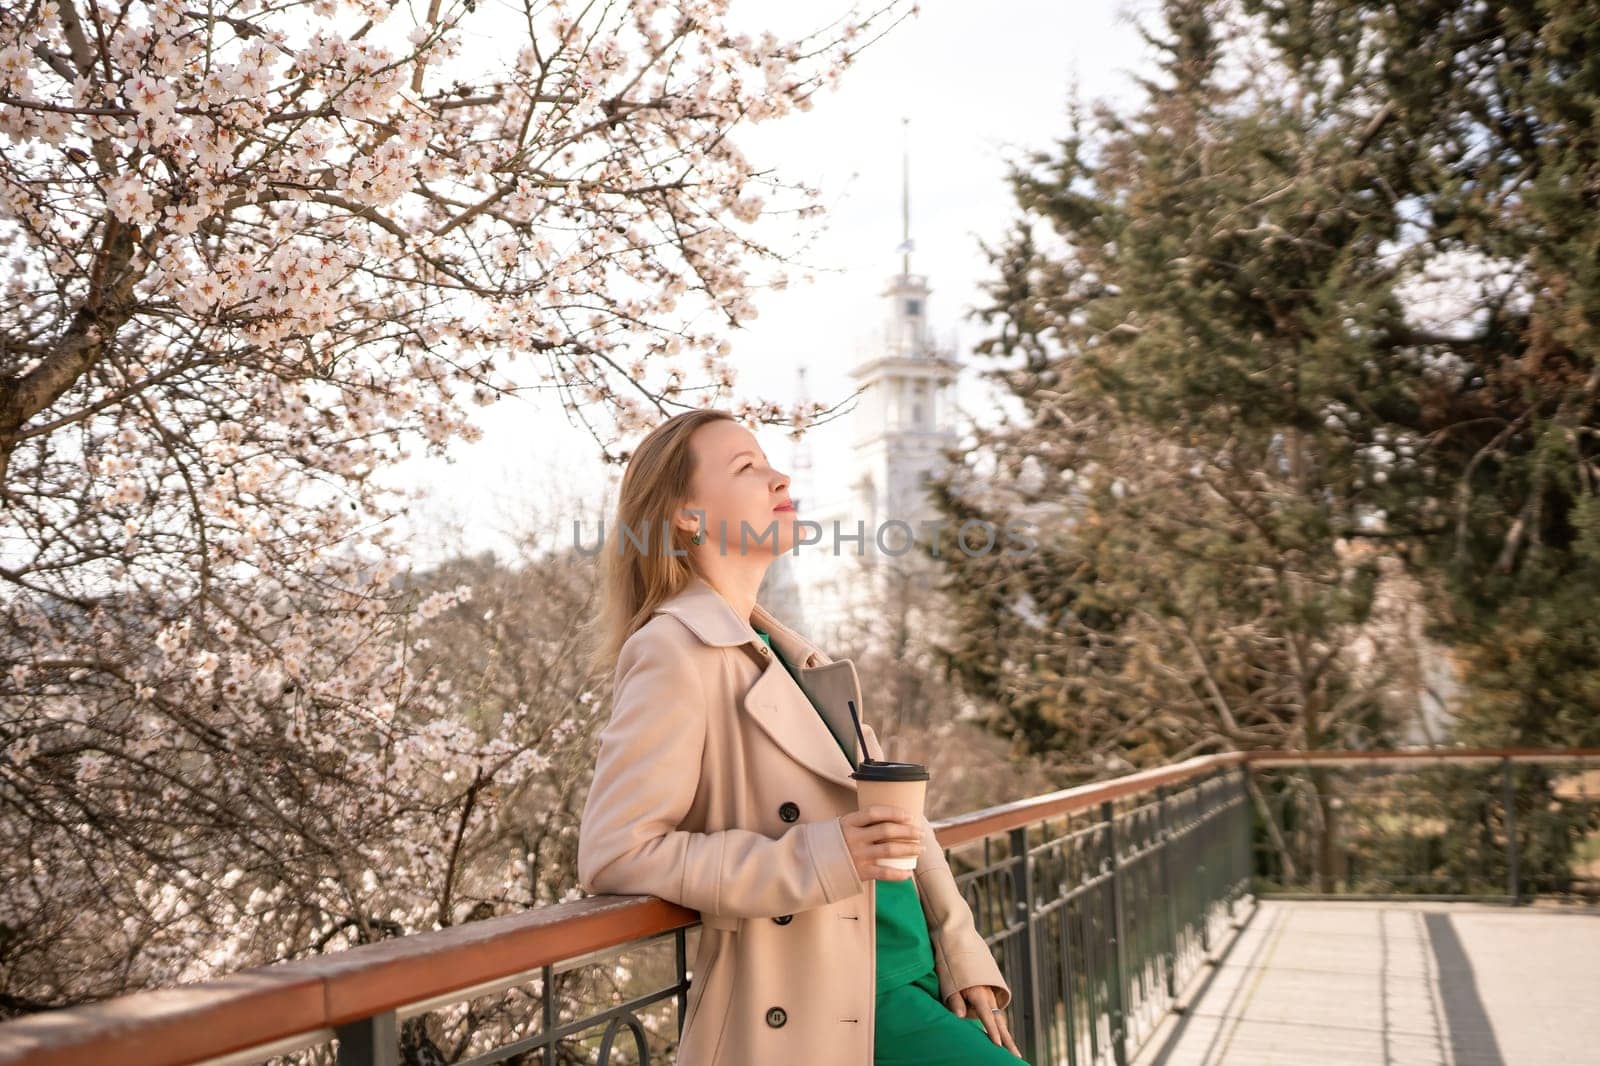 A woman is standing on a ledge with a cup of coffee in her hand. She is wearing sunglasses and a tan coat. The scene is set in a park with cherry blossoms in bloom. The woman is enjoying the view. by Matiunina